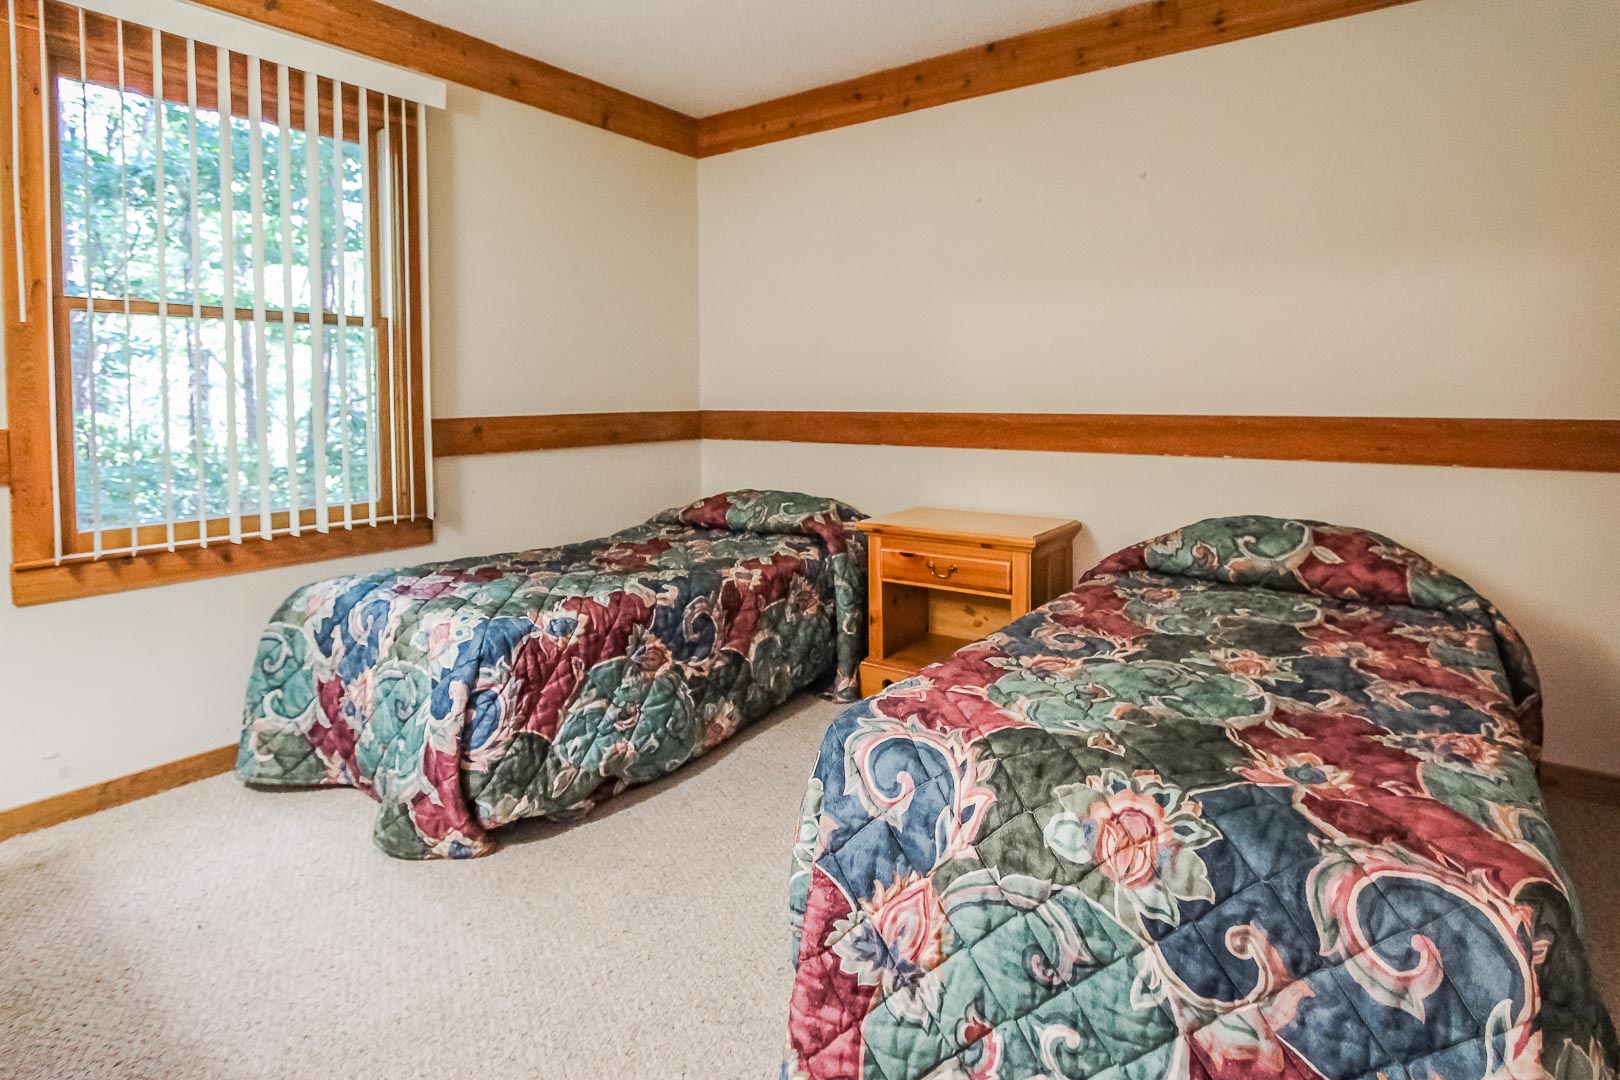 A two bedroom with double beds at VRI's Alpine Crest Resort in Georgia.